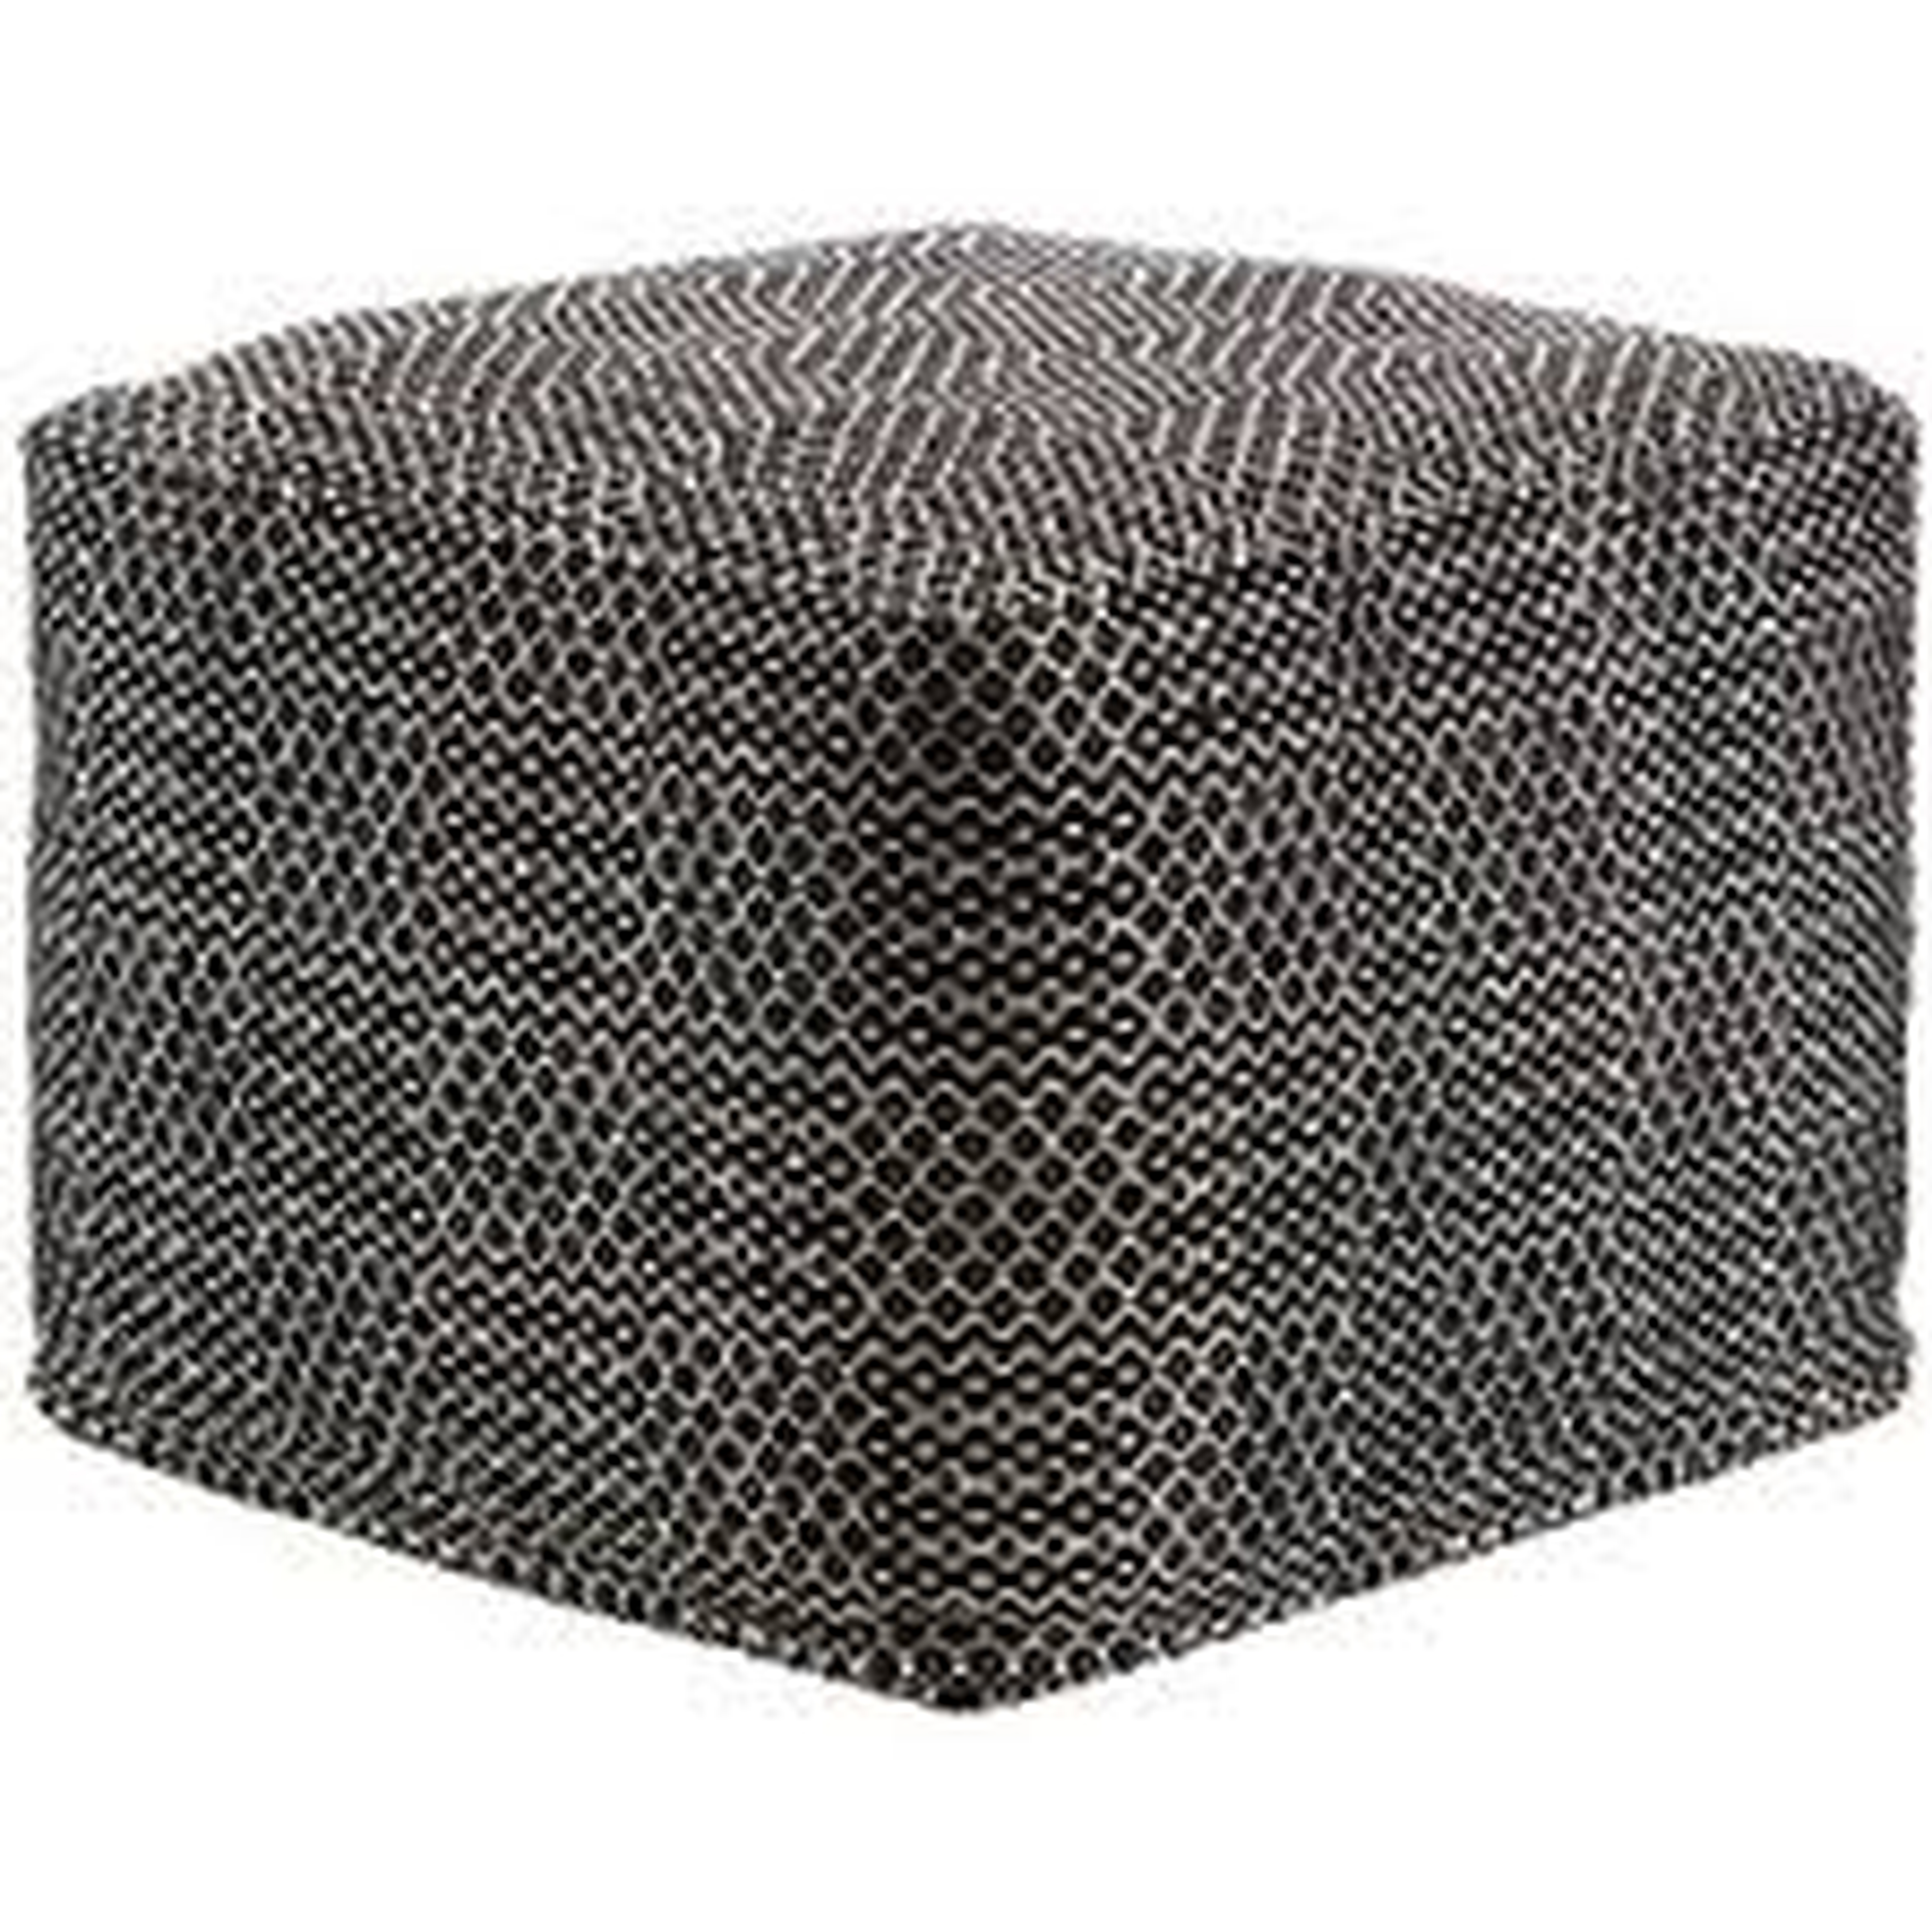 National Geographic Home Collection Pouf - Collective Weavers